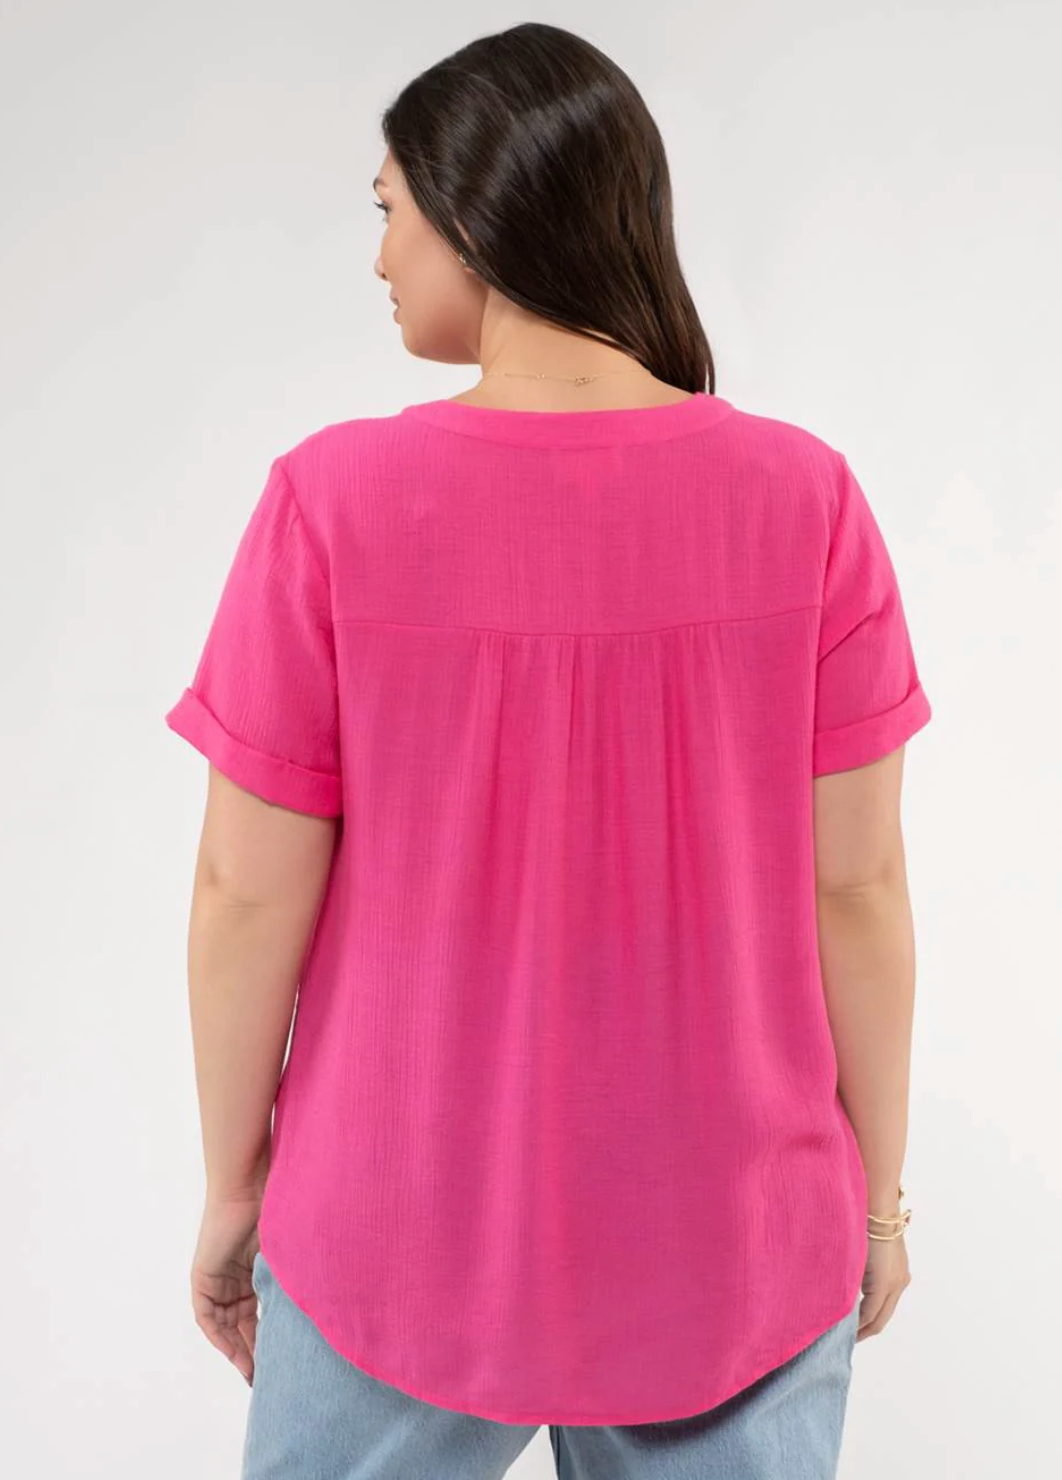 CURVY Floral Lace Woven Top in Fuchsia - The Street Boutique 